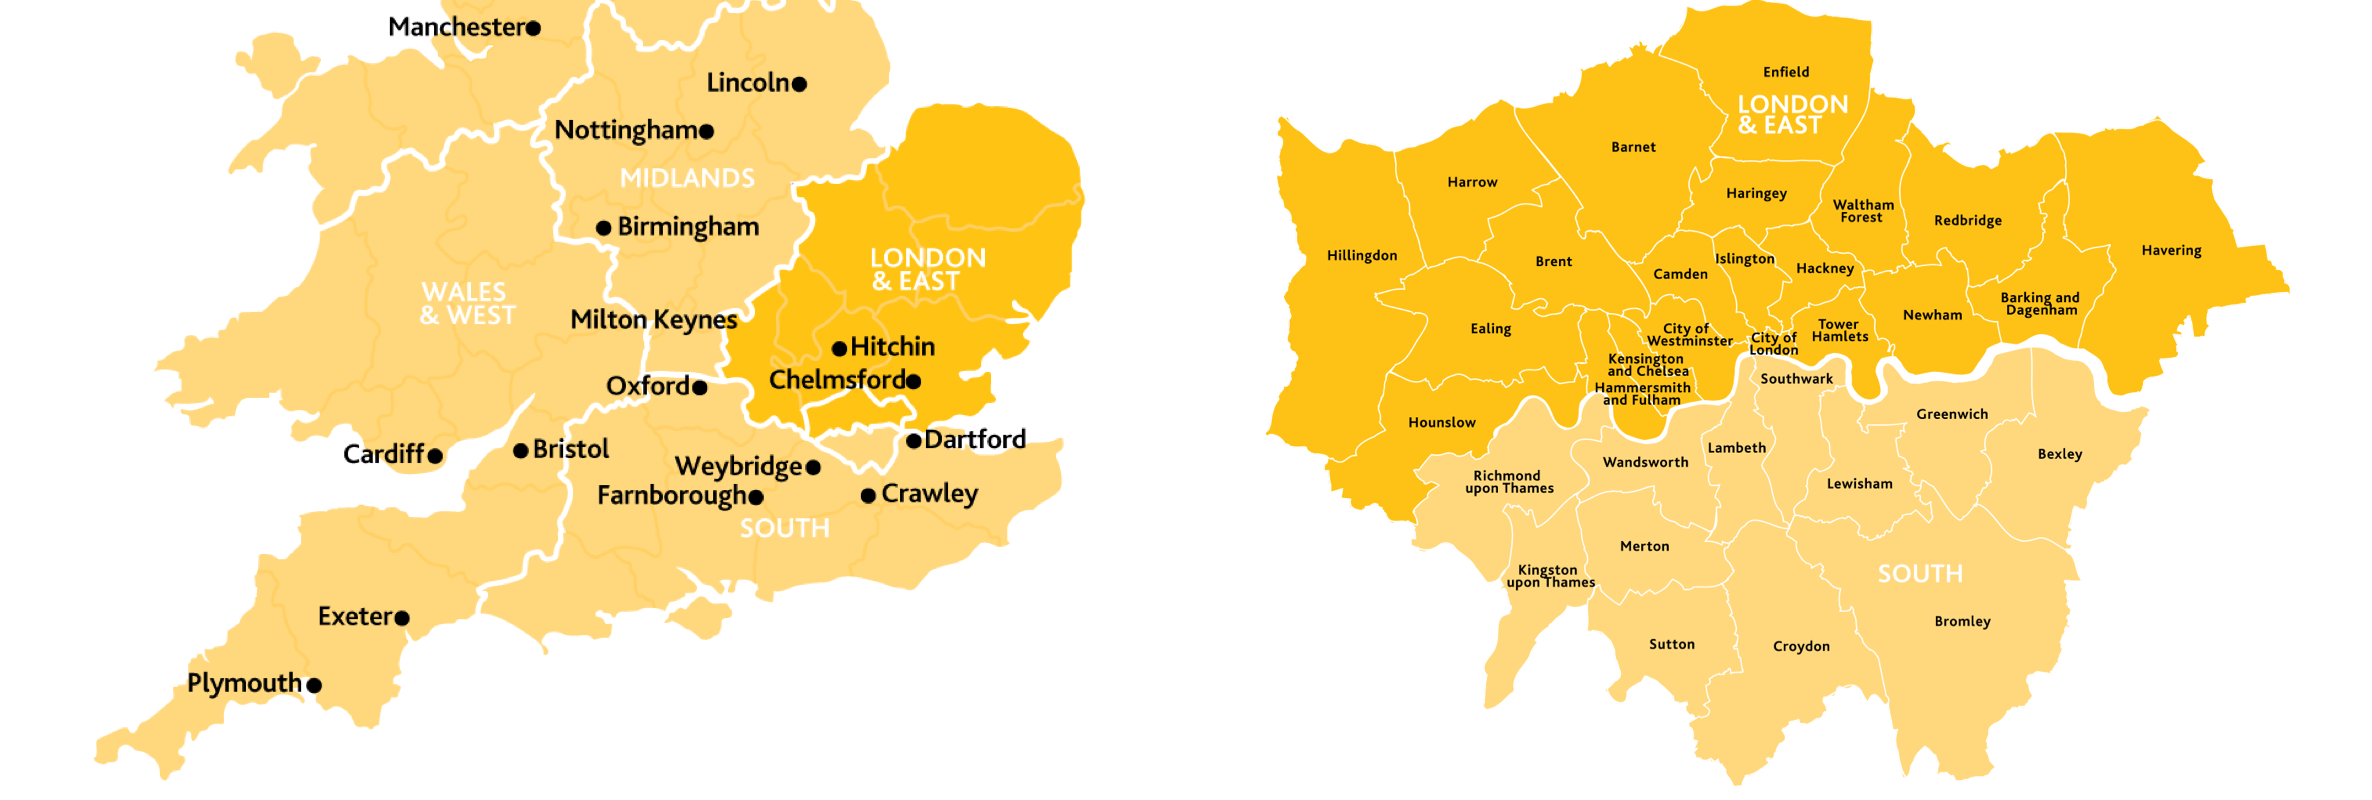 WD regions london and east.png